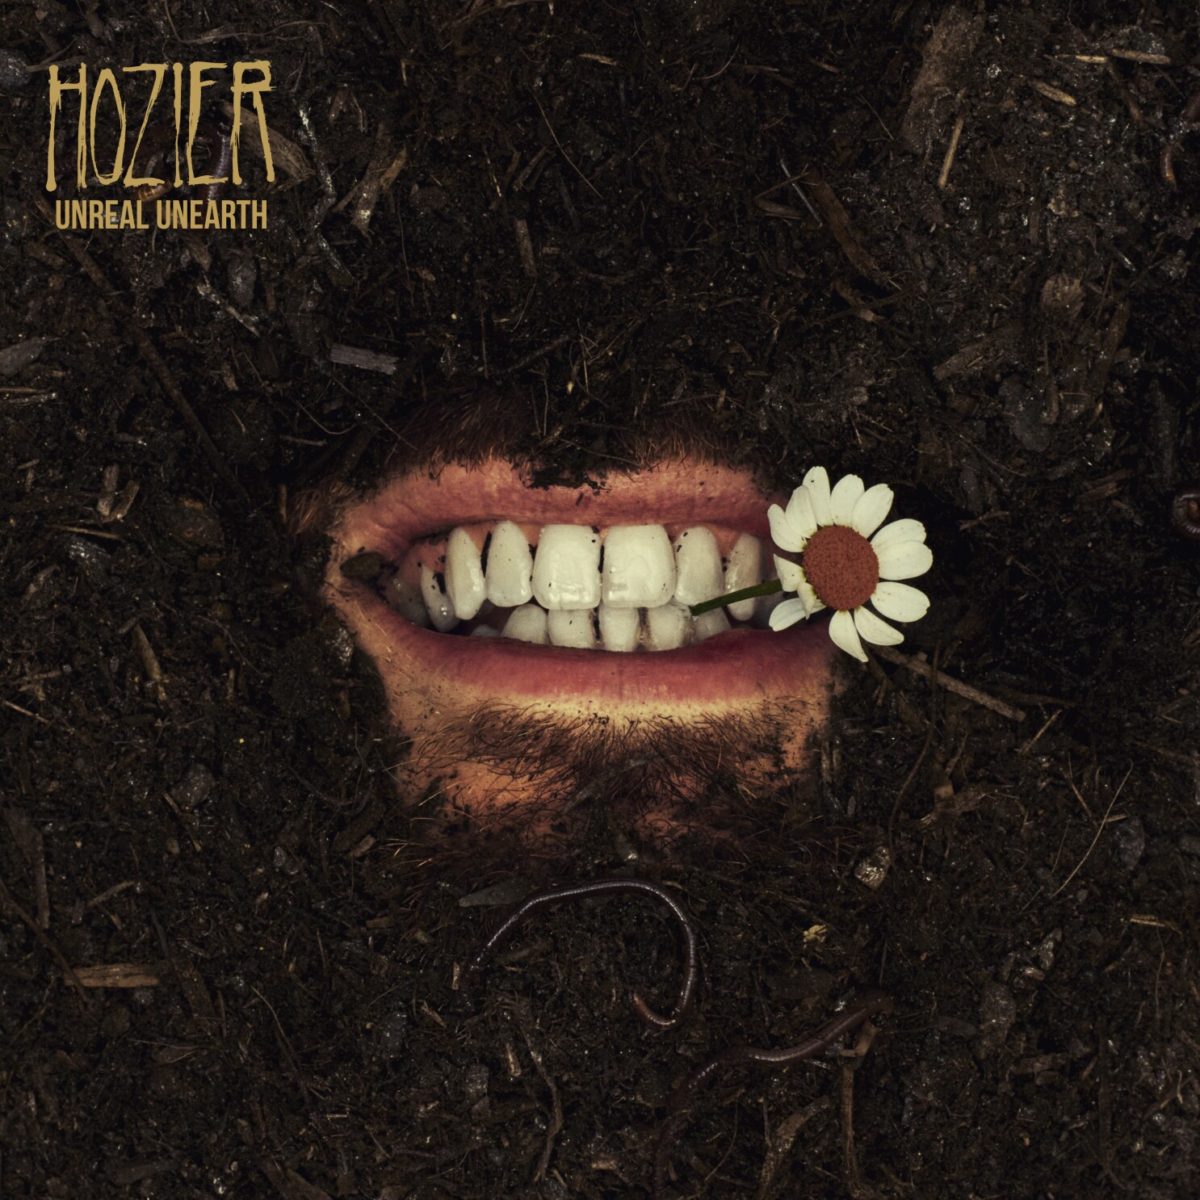 Hozier’s album covers are designed by his mother, Raine Hozier-Byrne. (Rubyworks Ltd./Columbia Records via AP)